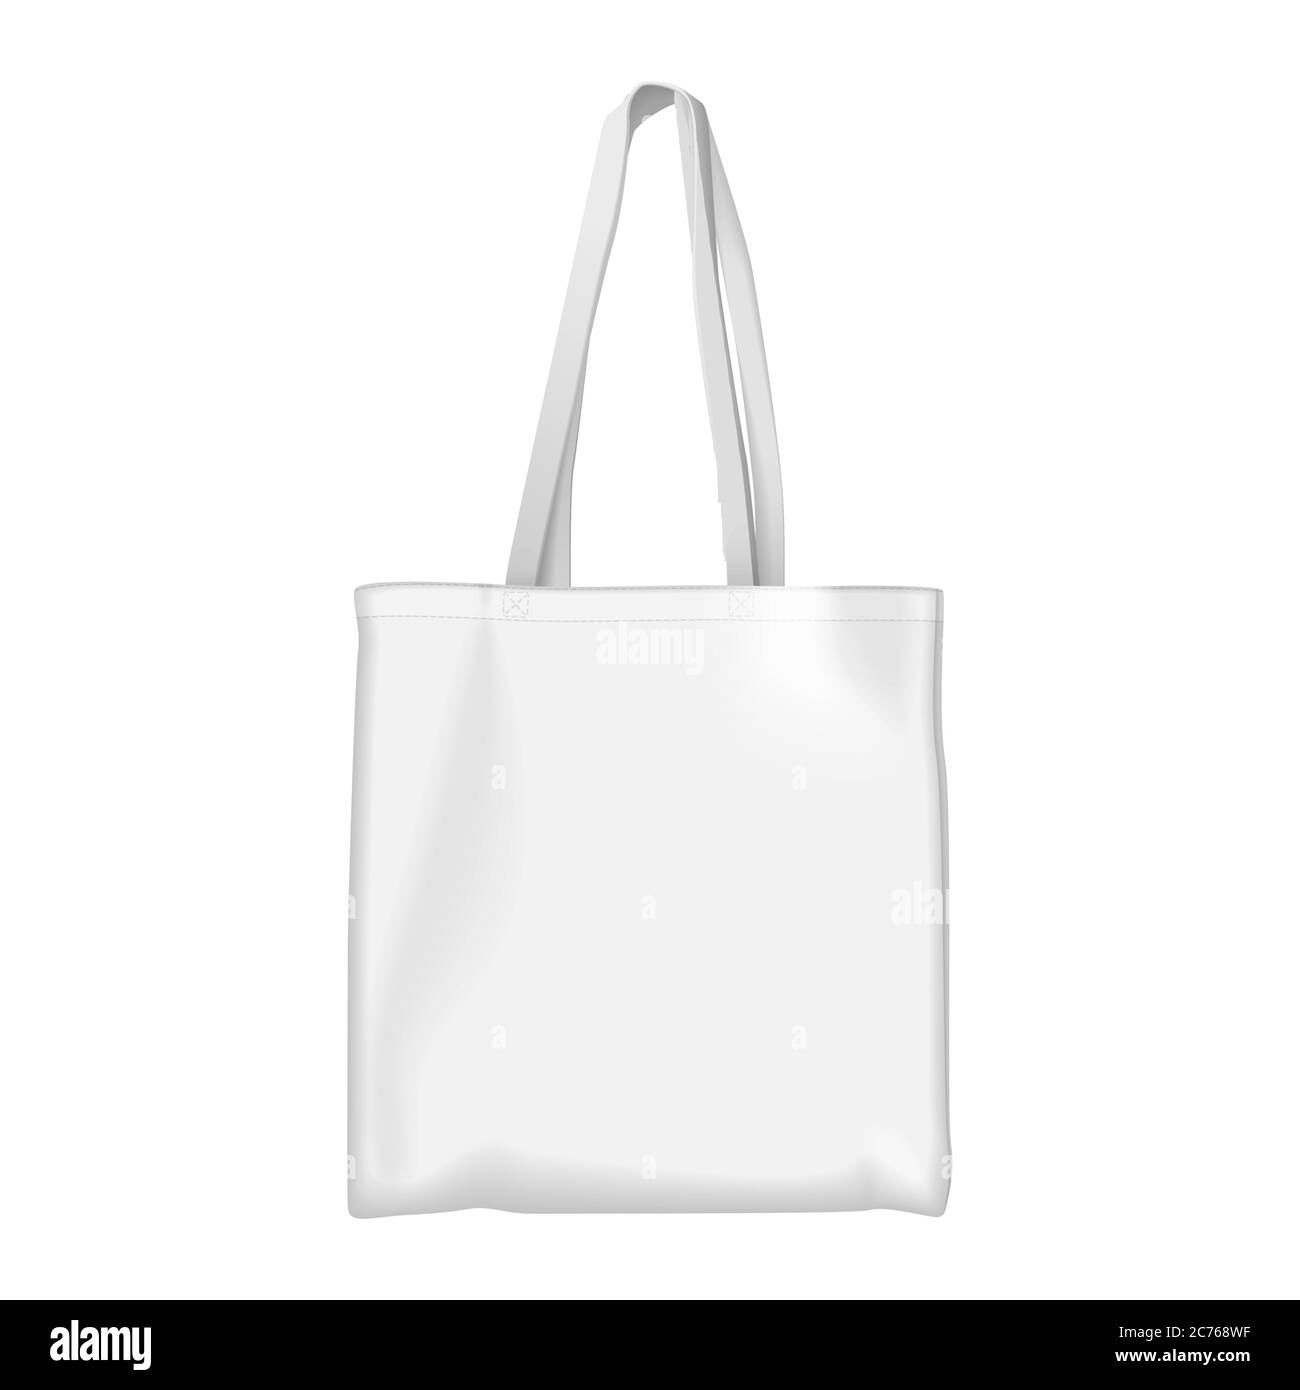 Full white Eco bag mock up vector illustration. Cartoon flat textile environment friendly shopper with eco bag lettering, ecological shopping handbag market purchases, save nature ecology isolated Stock Vector